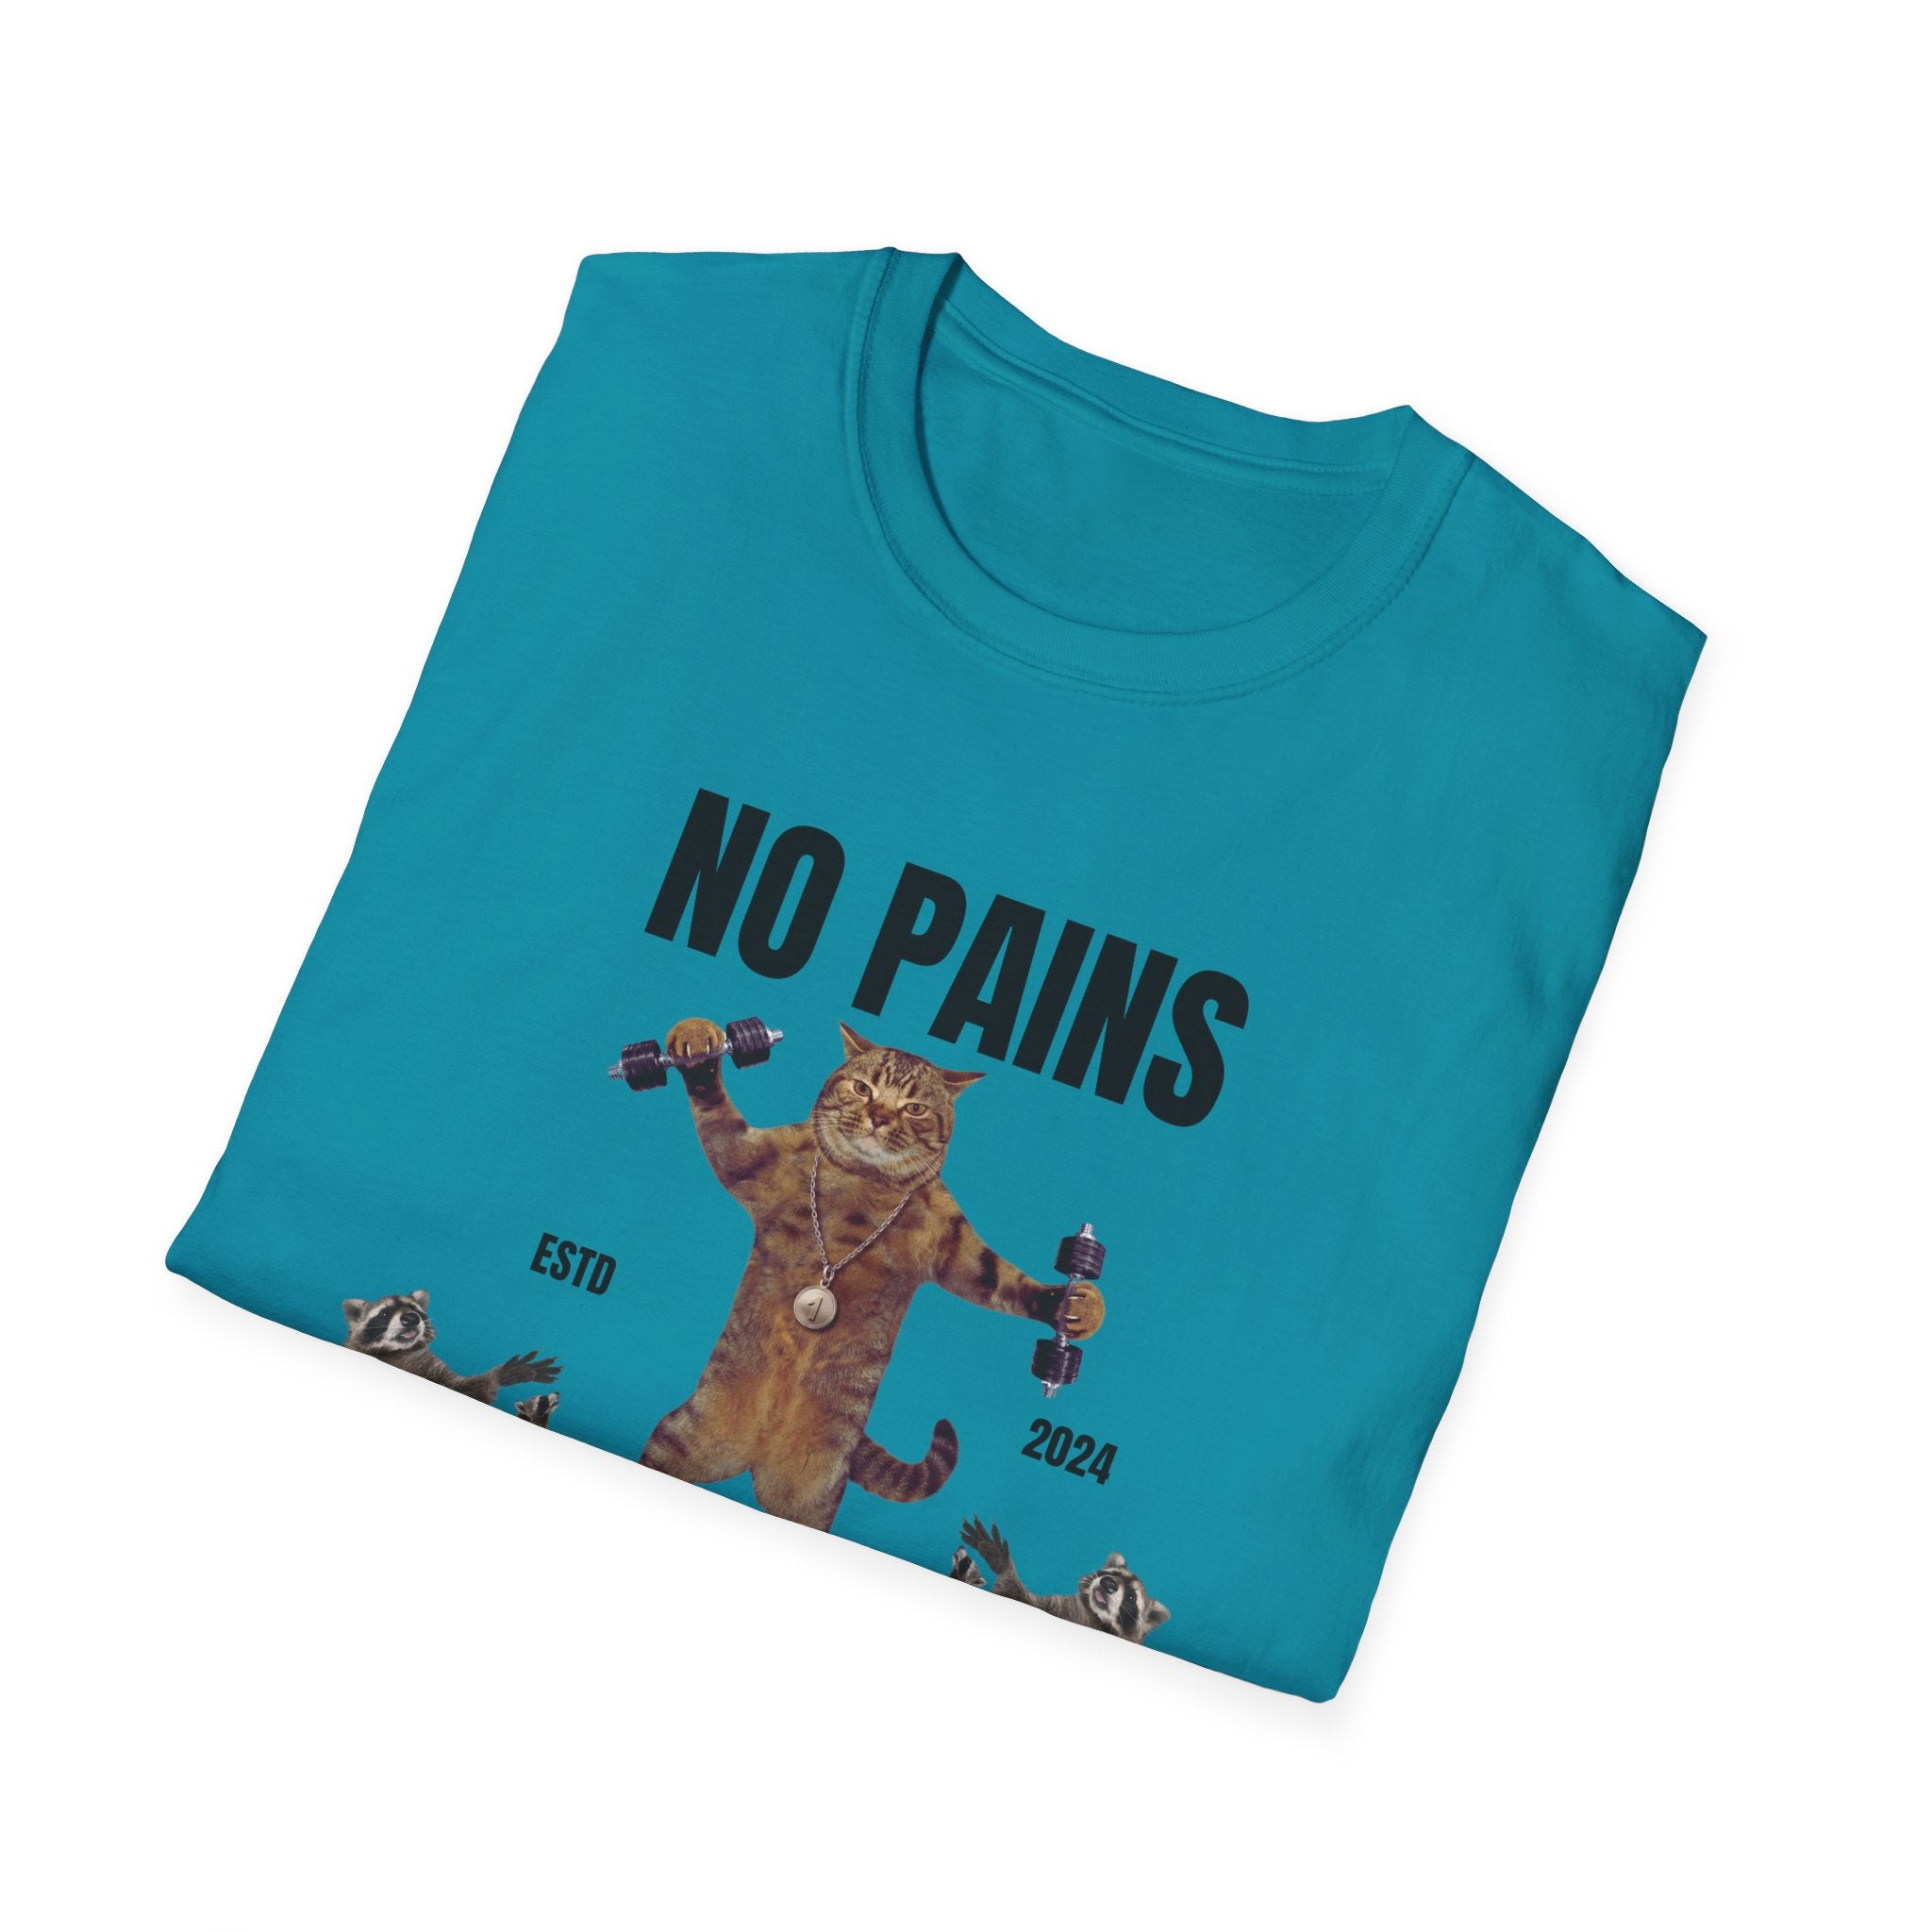 No Pains No Gains Funny Unisex Softstyle Crew Neck T-Shirt for Him, Gift for Friend